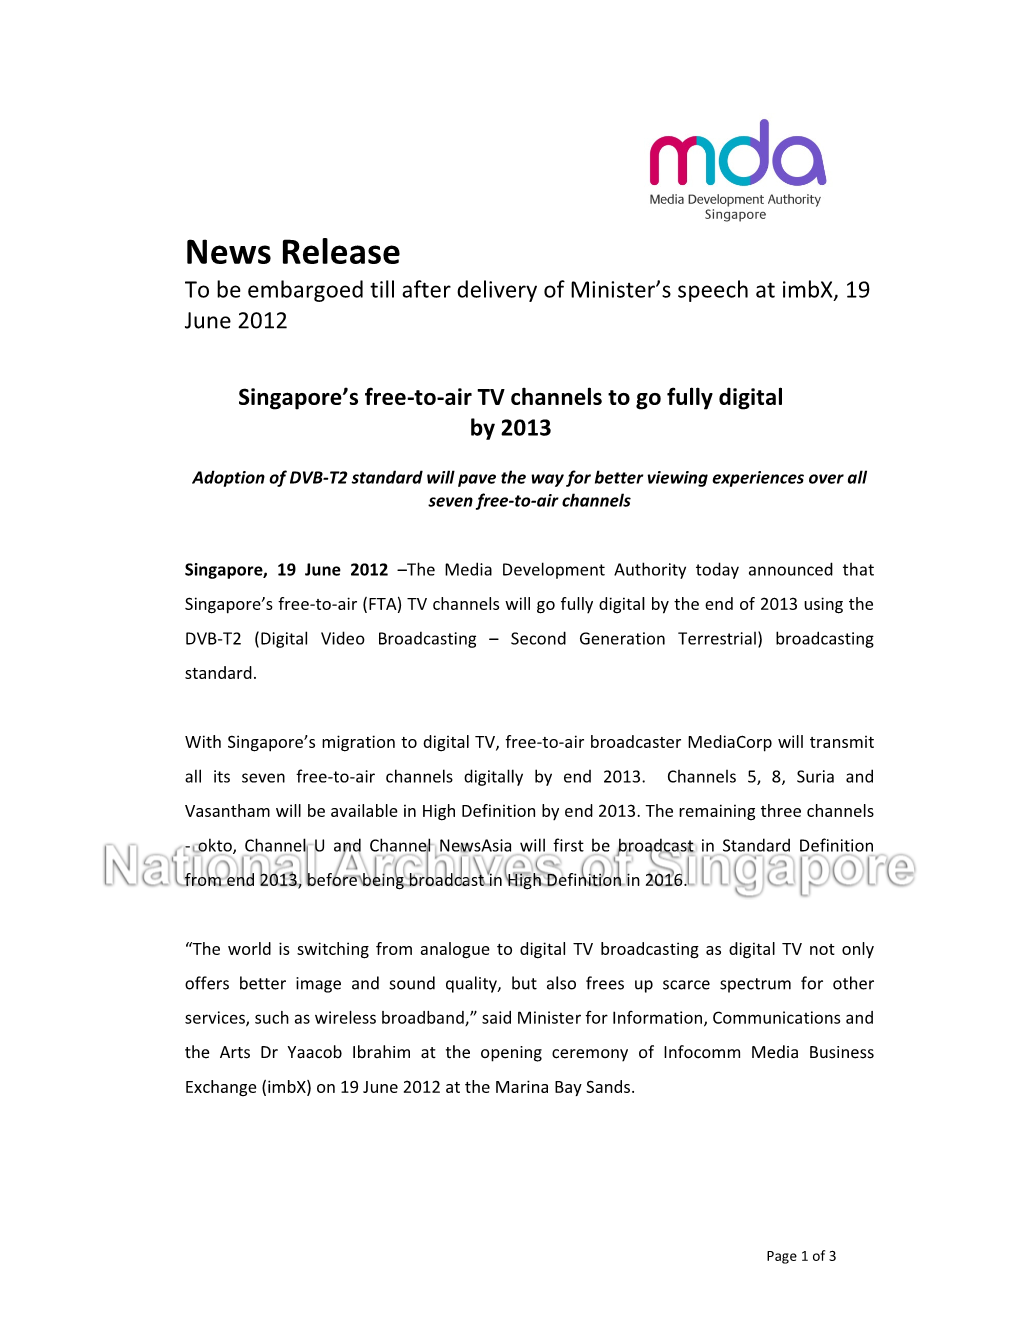 News Release to Be Embargoed Till After Delivery of Minister’S Speech at Imbx, 19 June 2012